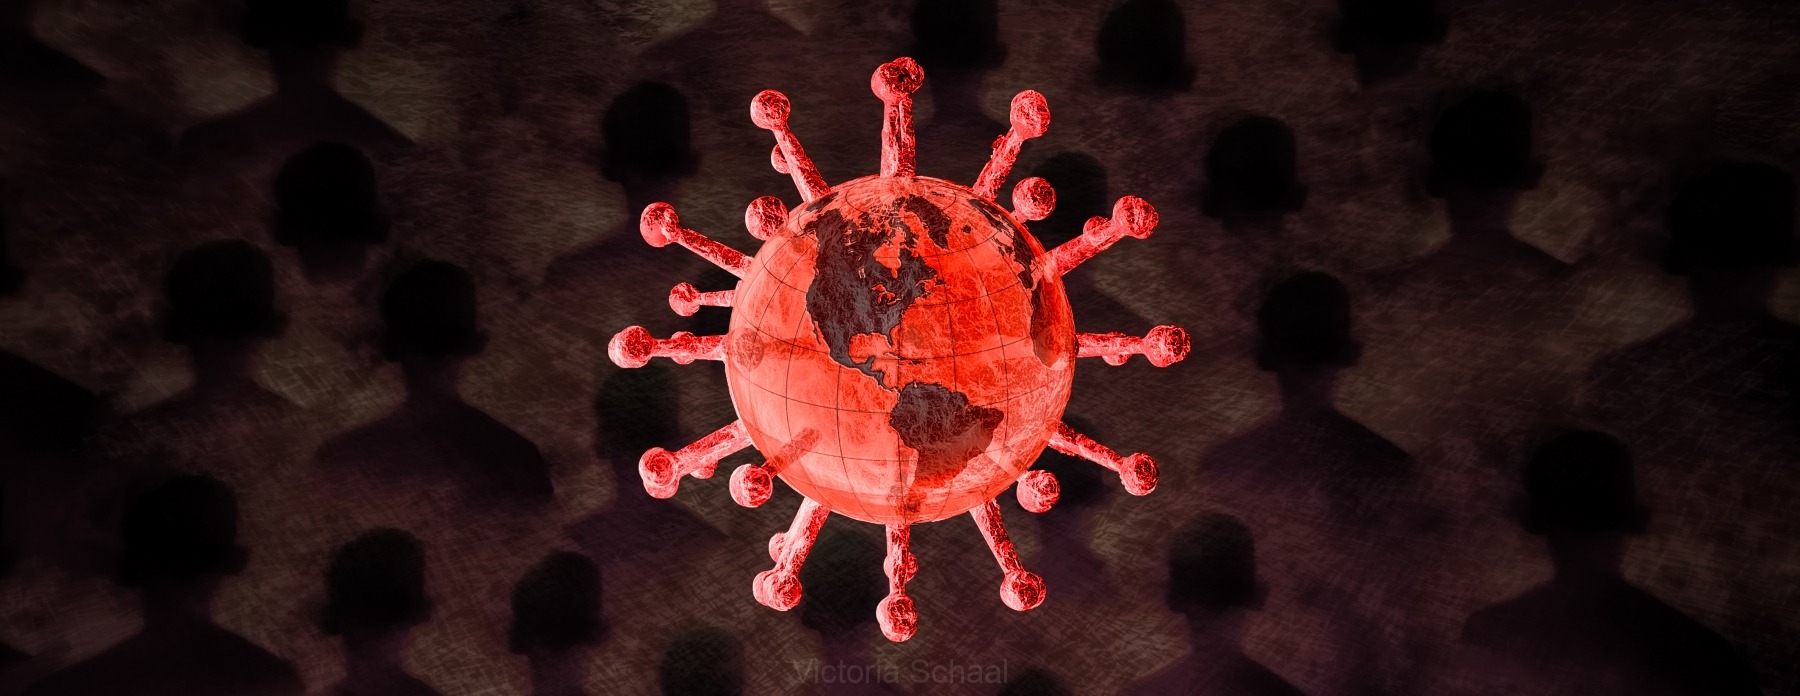 Coronavirus engulfing the world with victims’ silhouettes on the background